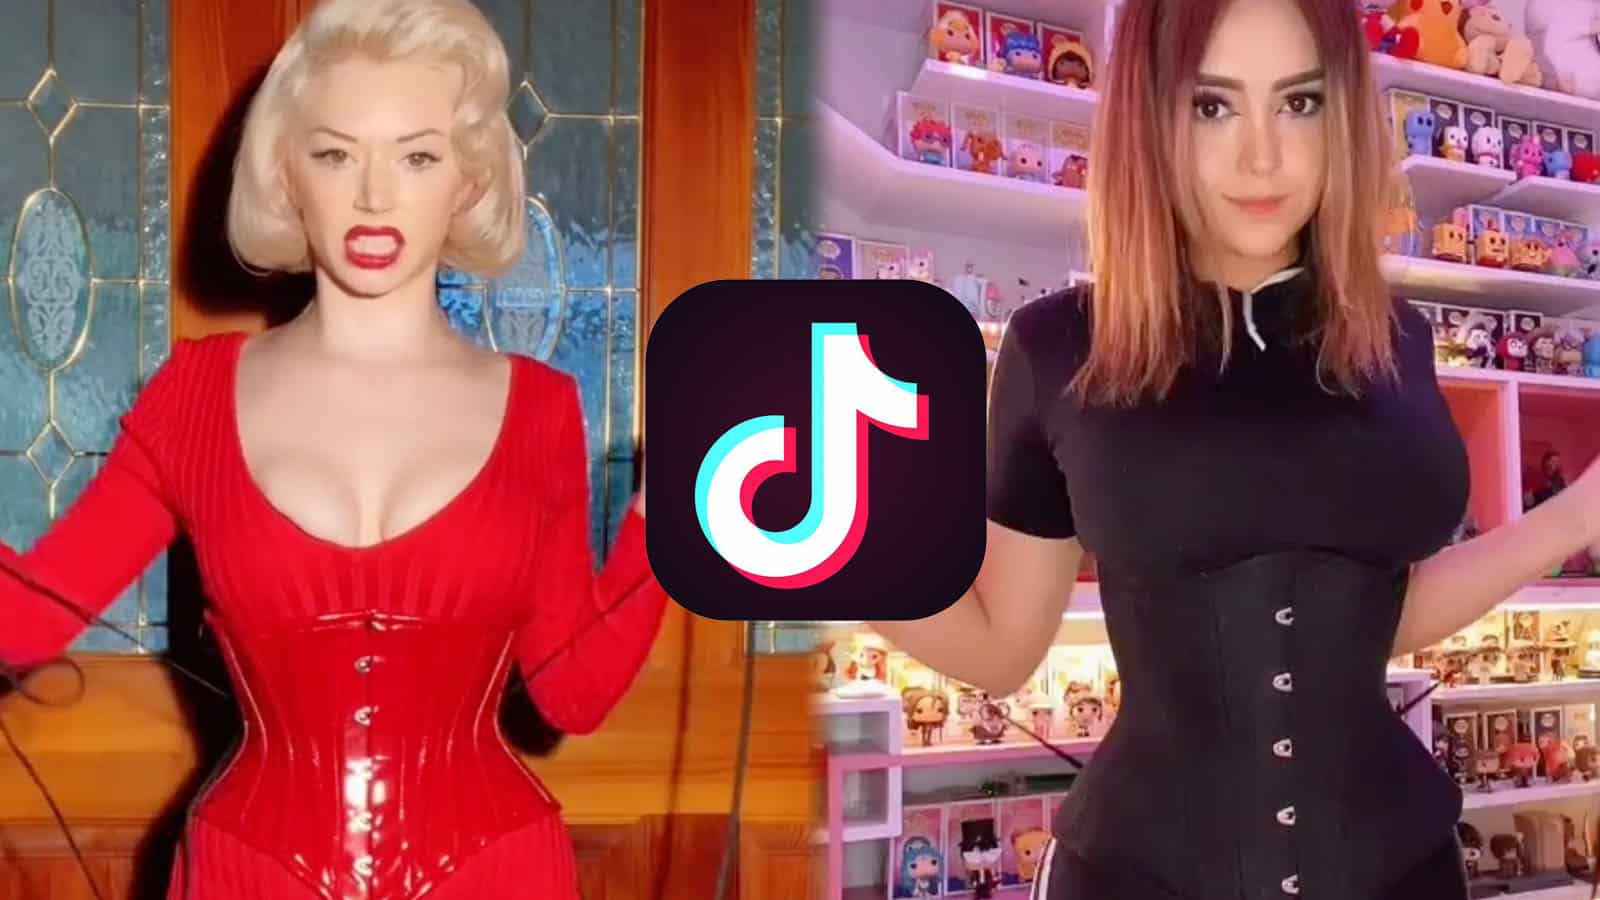 No One Wants a Waist Over Nine Inches - Corsets Challenge TikTok